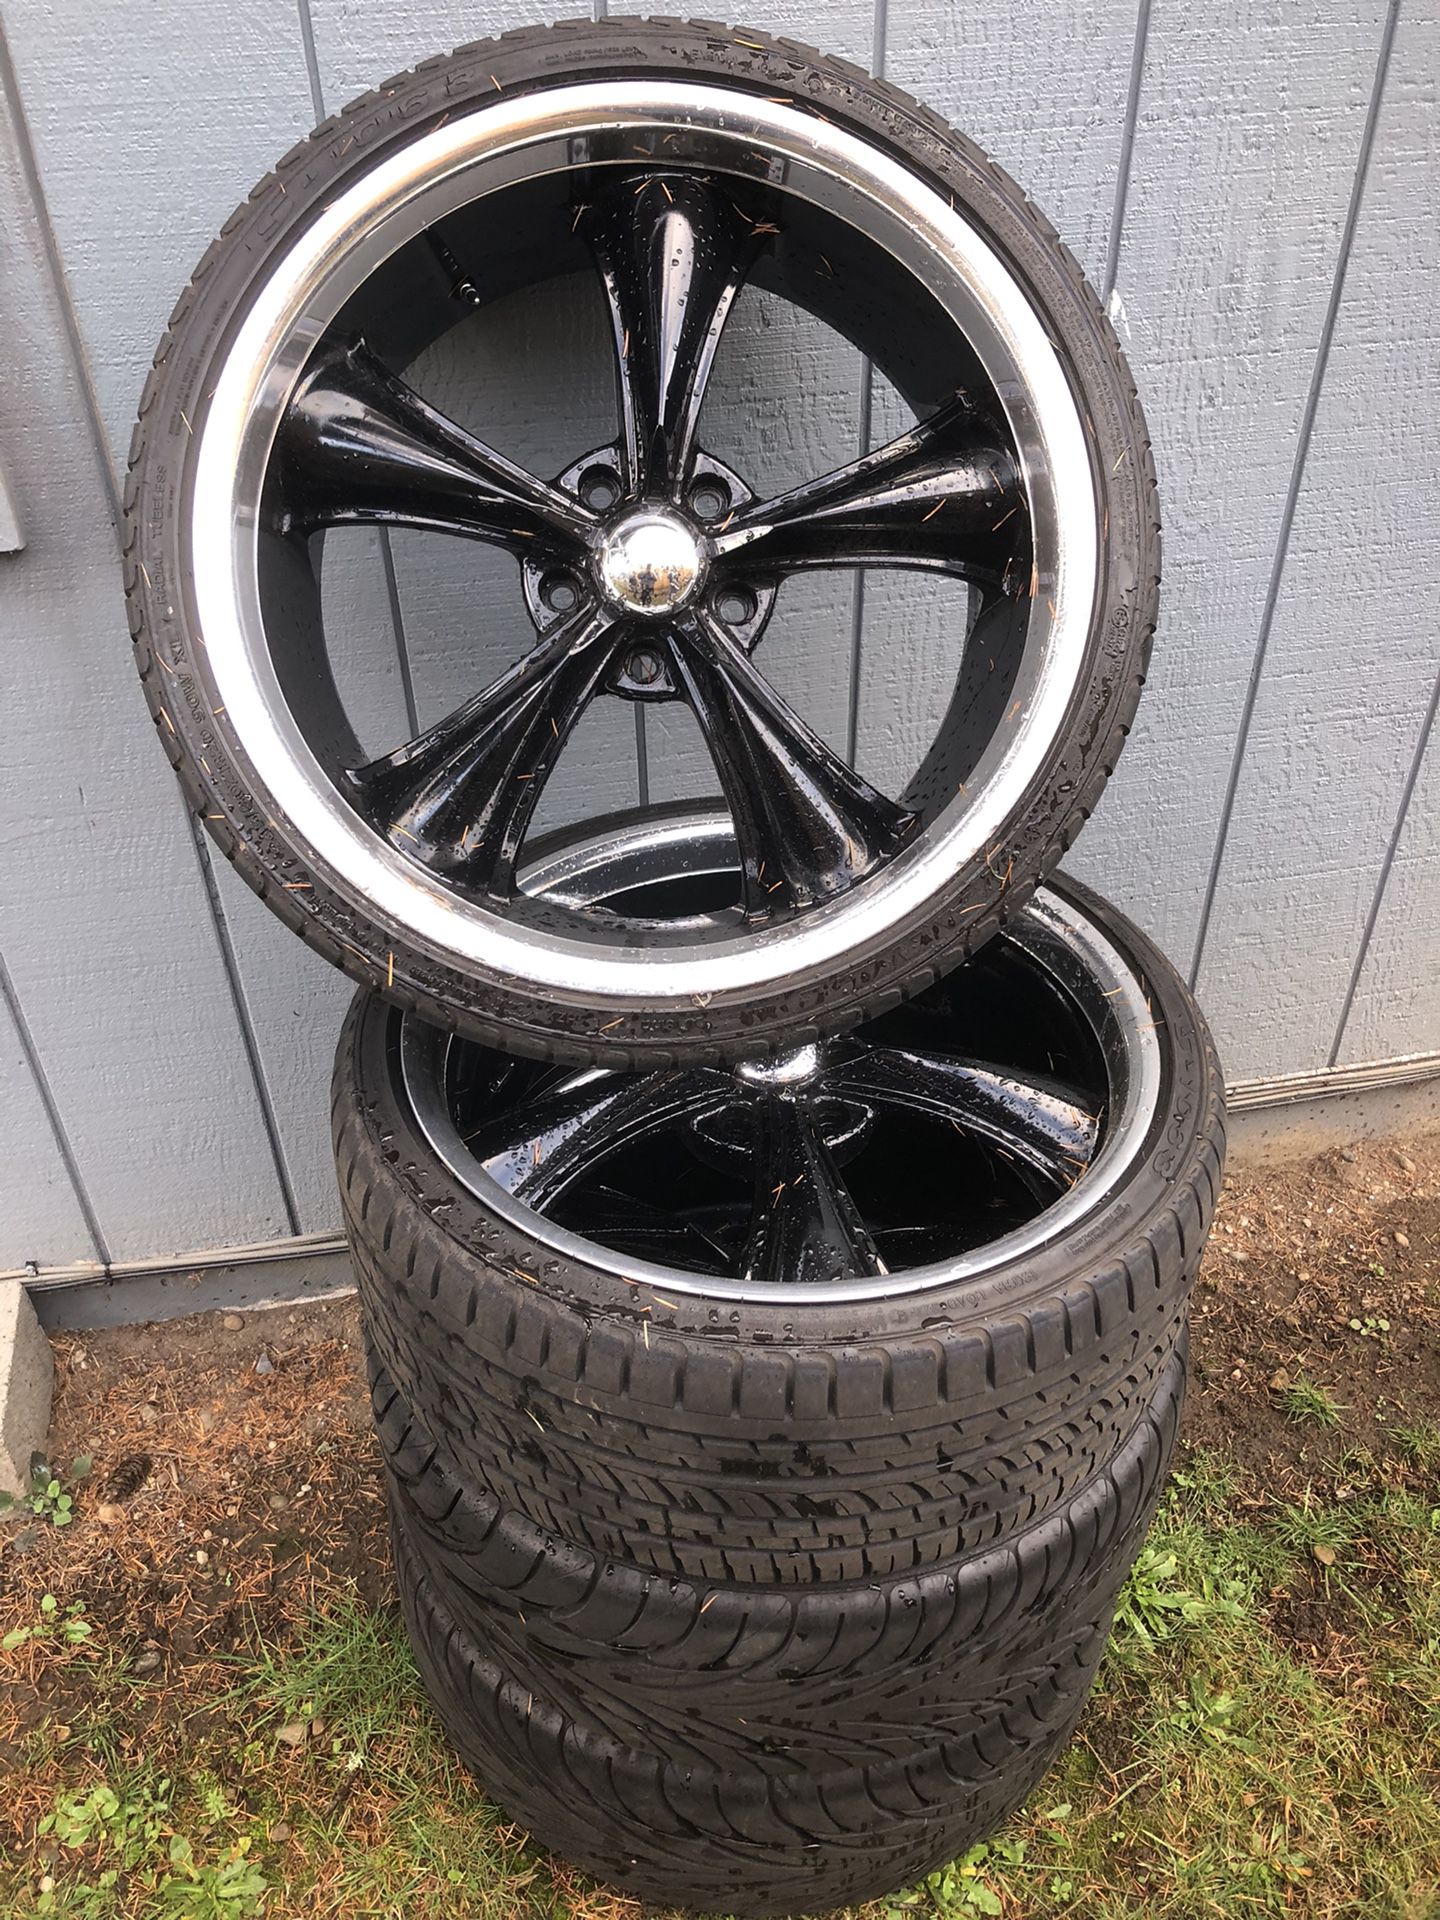 Boss motorsports 20” rims and tires